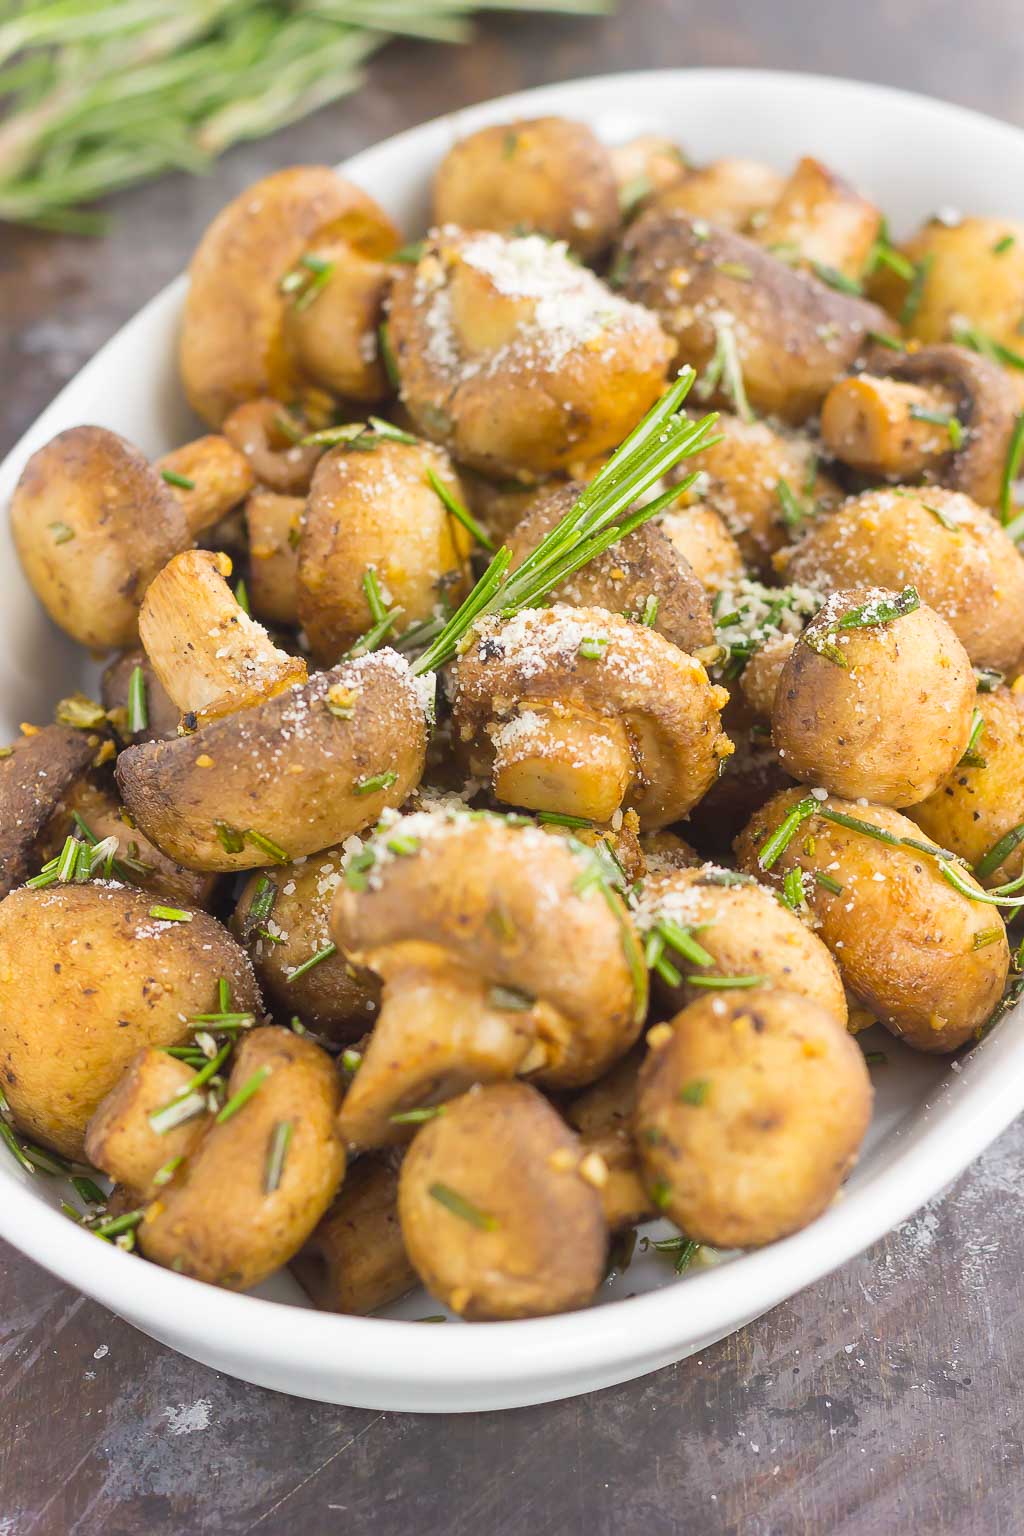 These Roasted Mushrooms with Garlic and Rosemary are loaded with a savory mixture of herbs and then baked until golden. Fast, fresh and easy to make, these mushrooms take less than 30 minutes from start to finish!